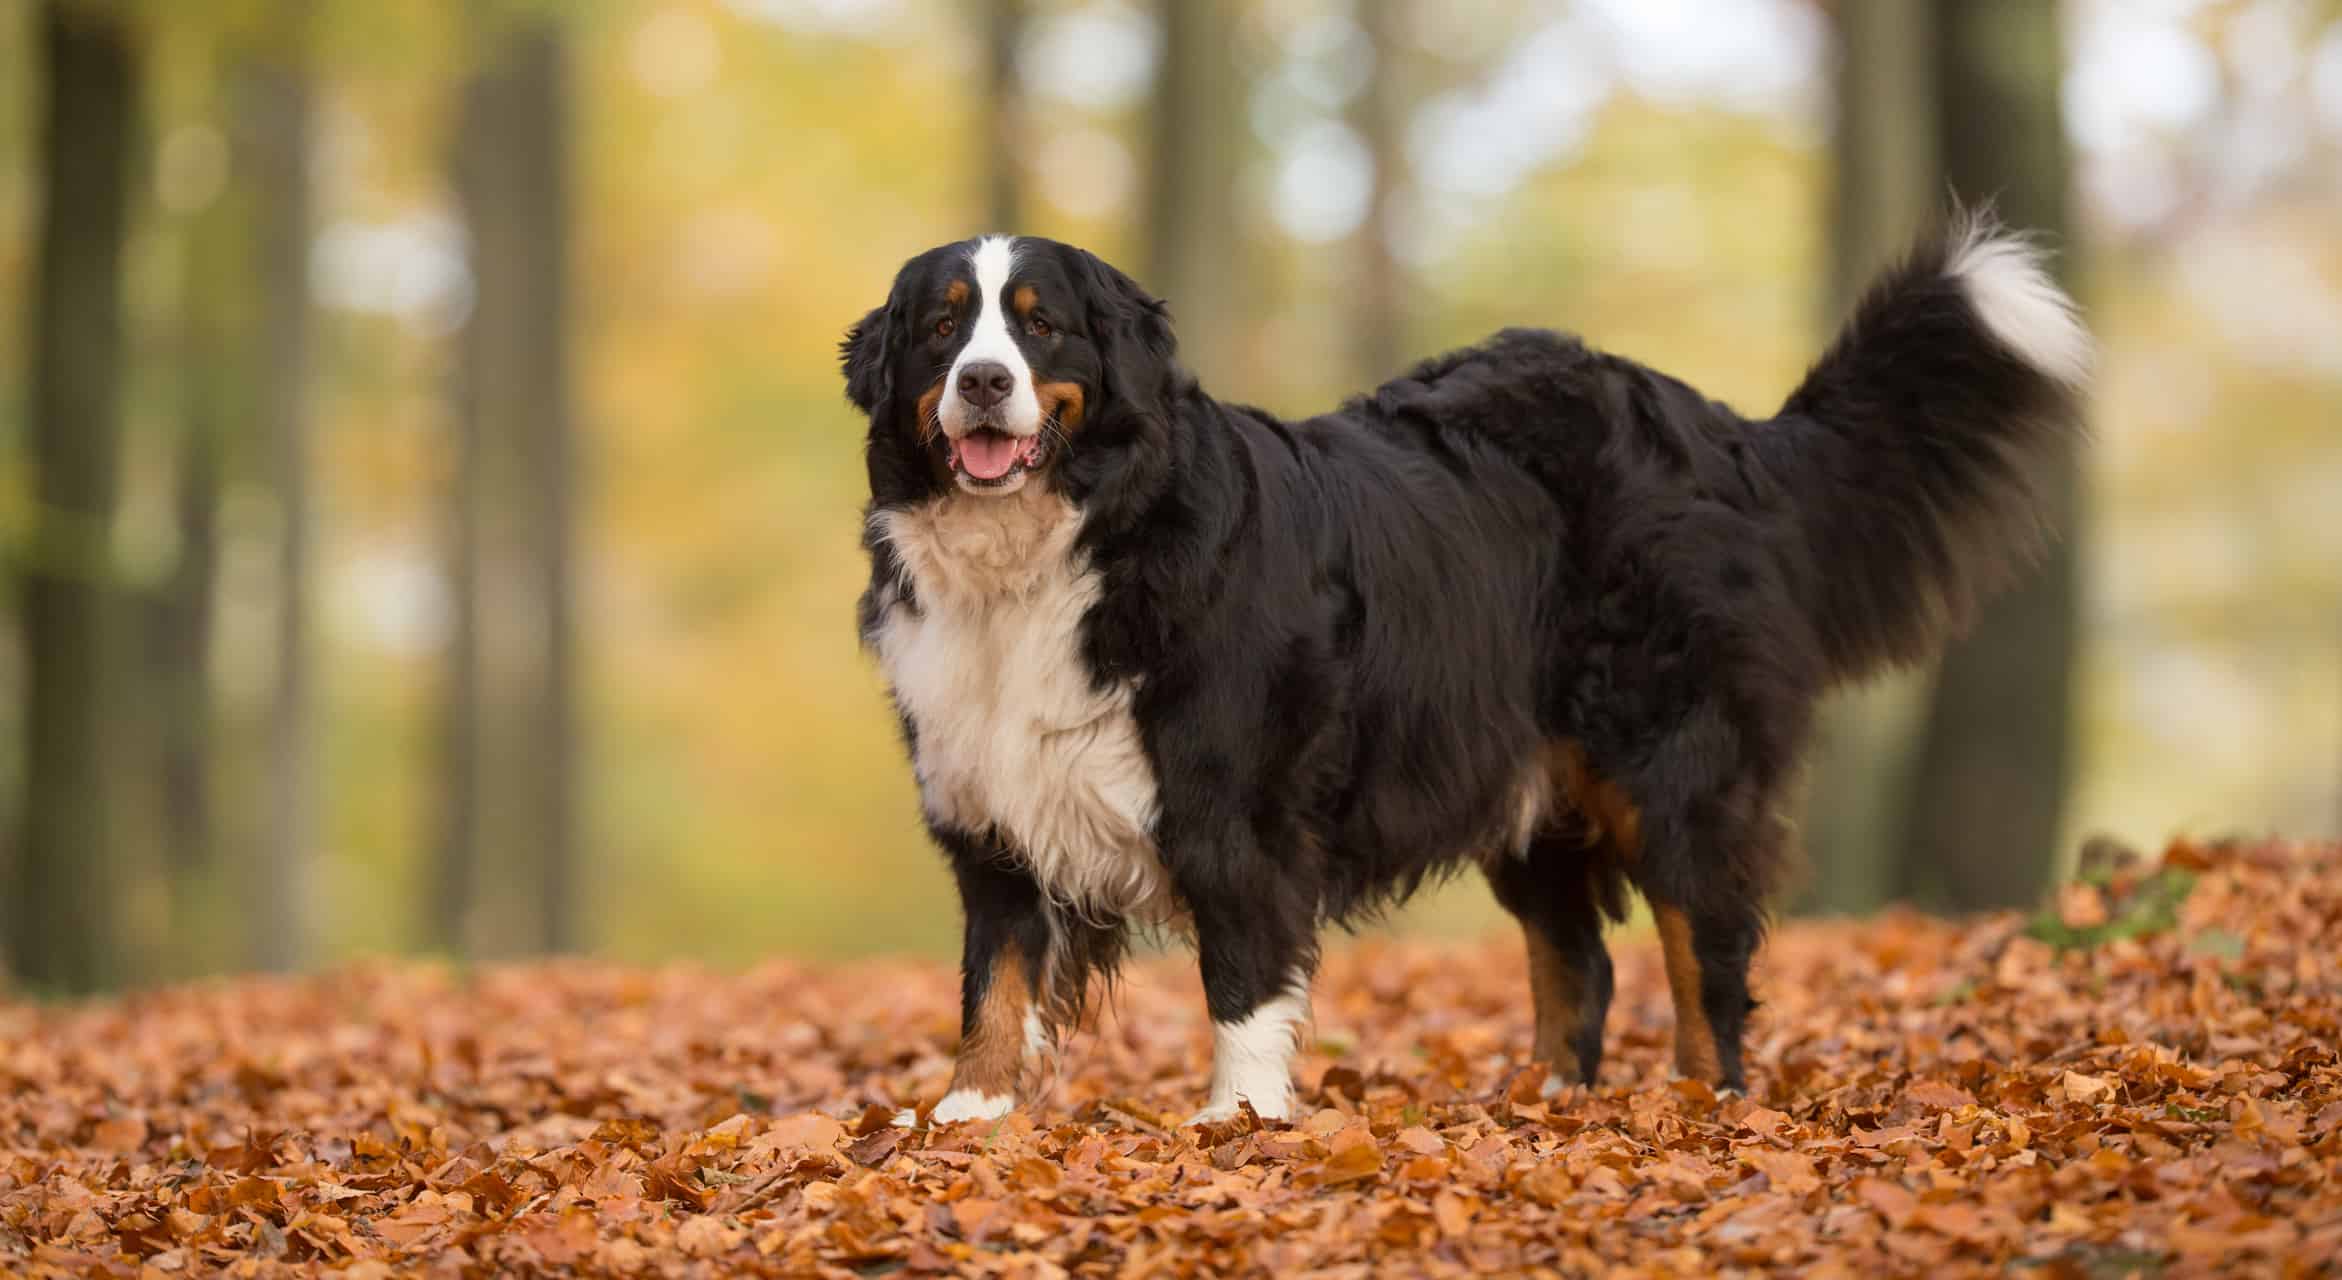 Purebred adult Bernese Mountain Dog outdoors in the forest on a cloudy day during autumn.